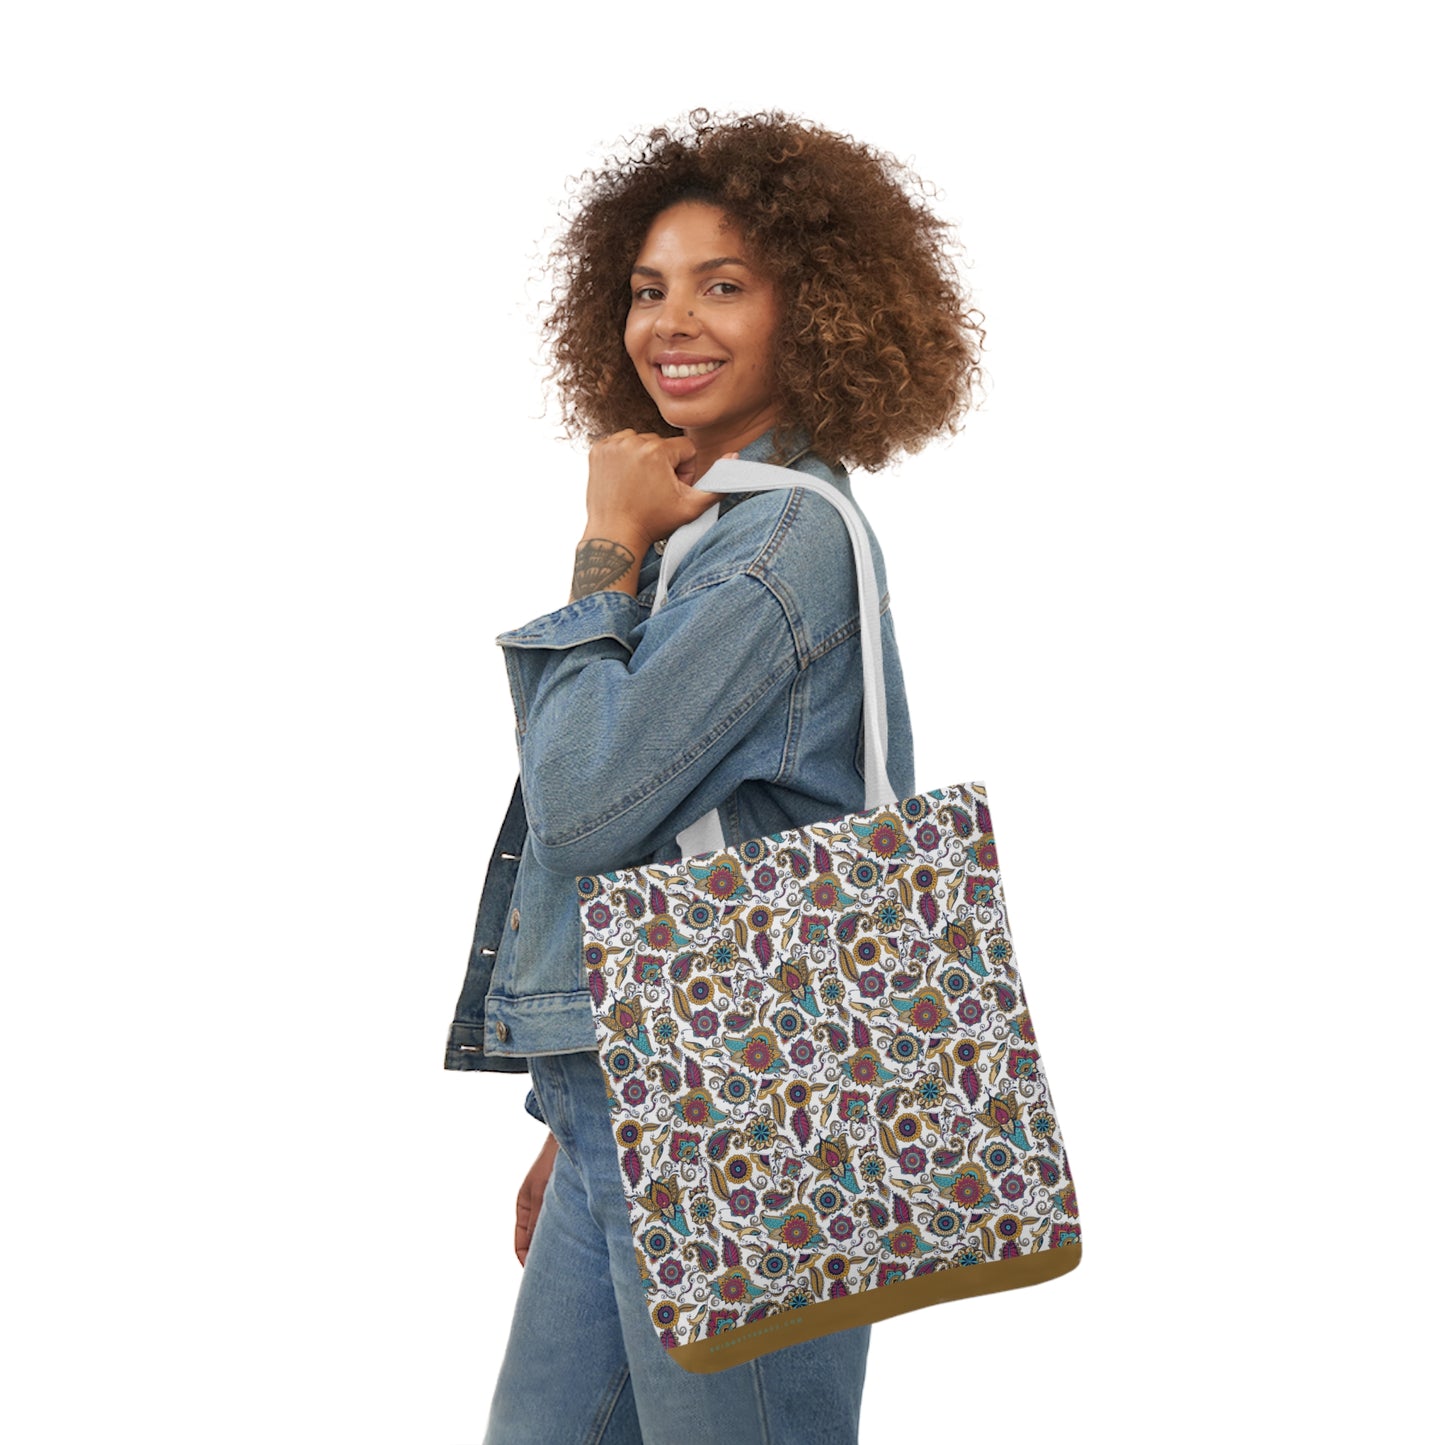 Peacock Paisley Polyester Canvas Tote Bag